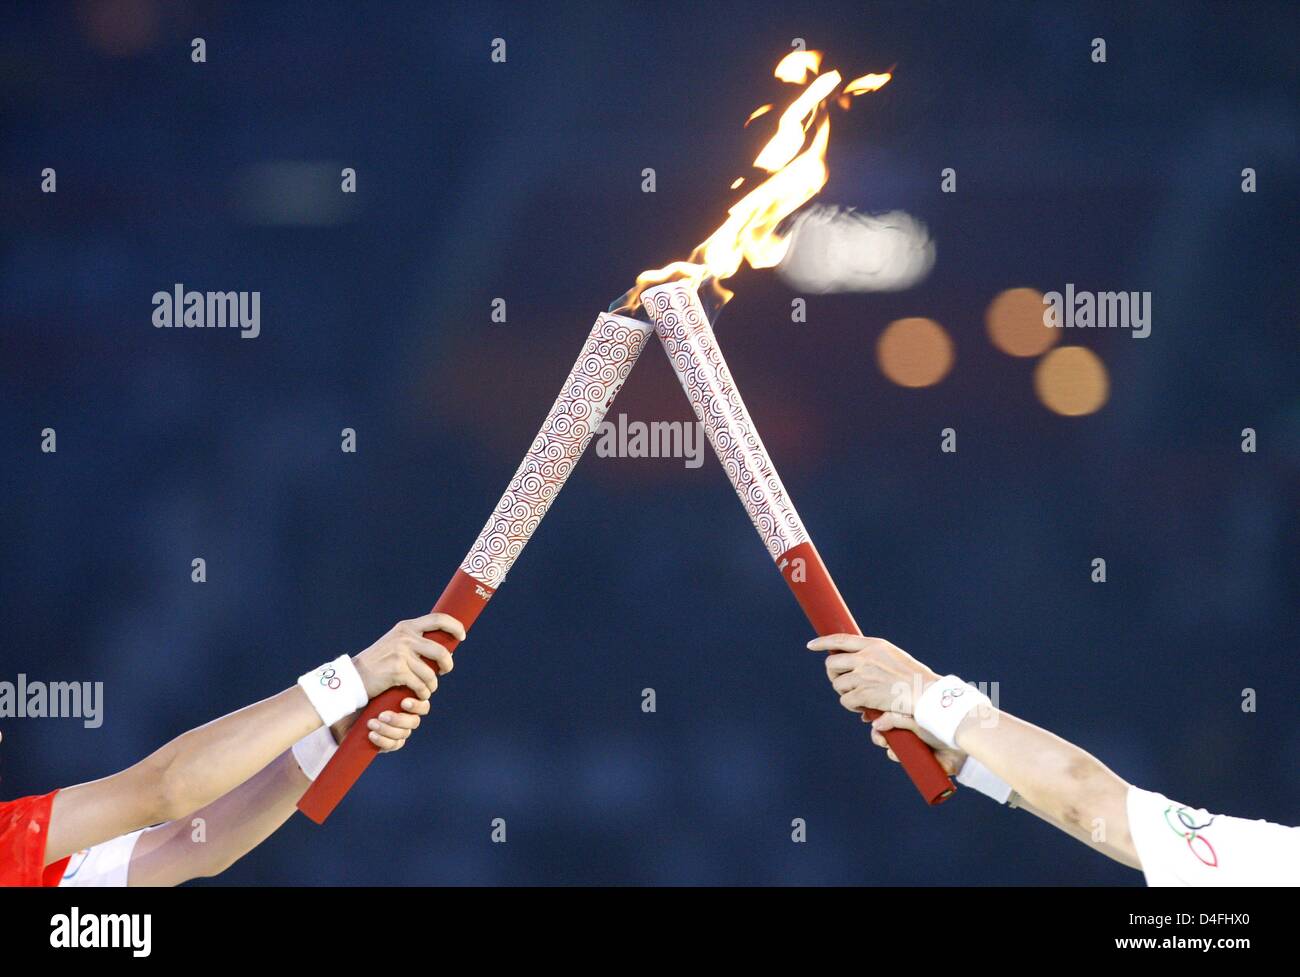 Torch bearers hand-over the flame during the Opening Ceremony of the Beijing 2008 Olympic Games at the National Stadium, known as Bird's Nest, Beijing, China, 08 August 2008. Foto: MARCUS BRANDT (c) dpa - Bildfunk Stock Photo